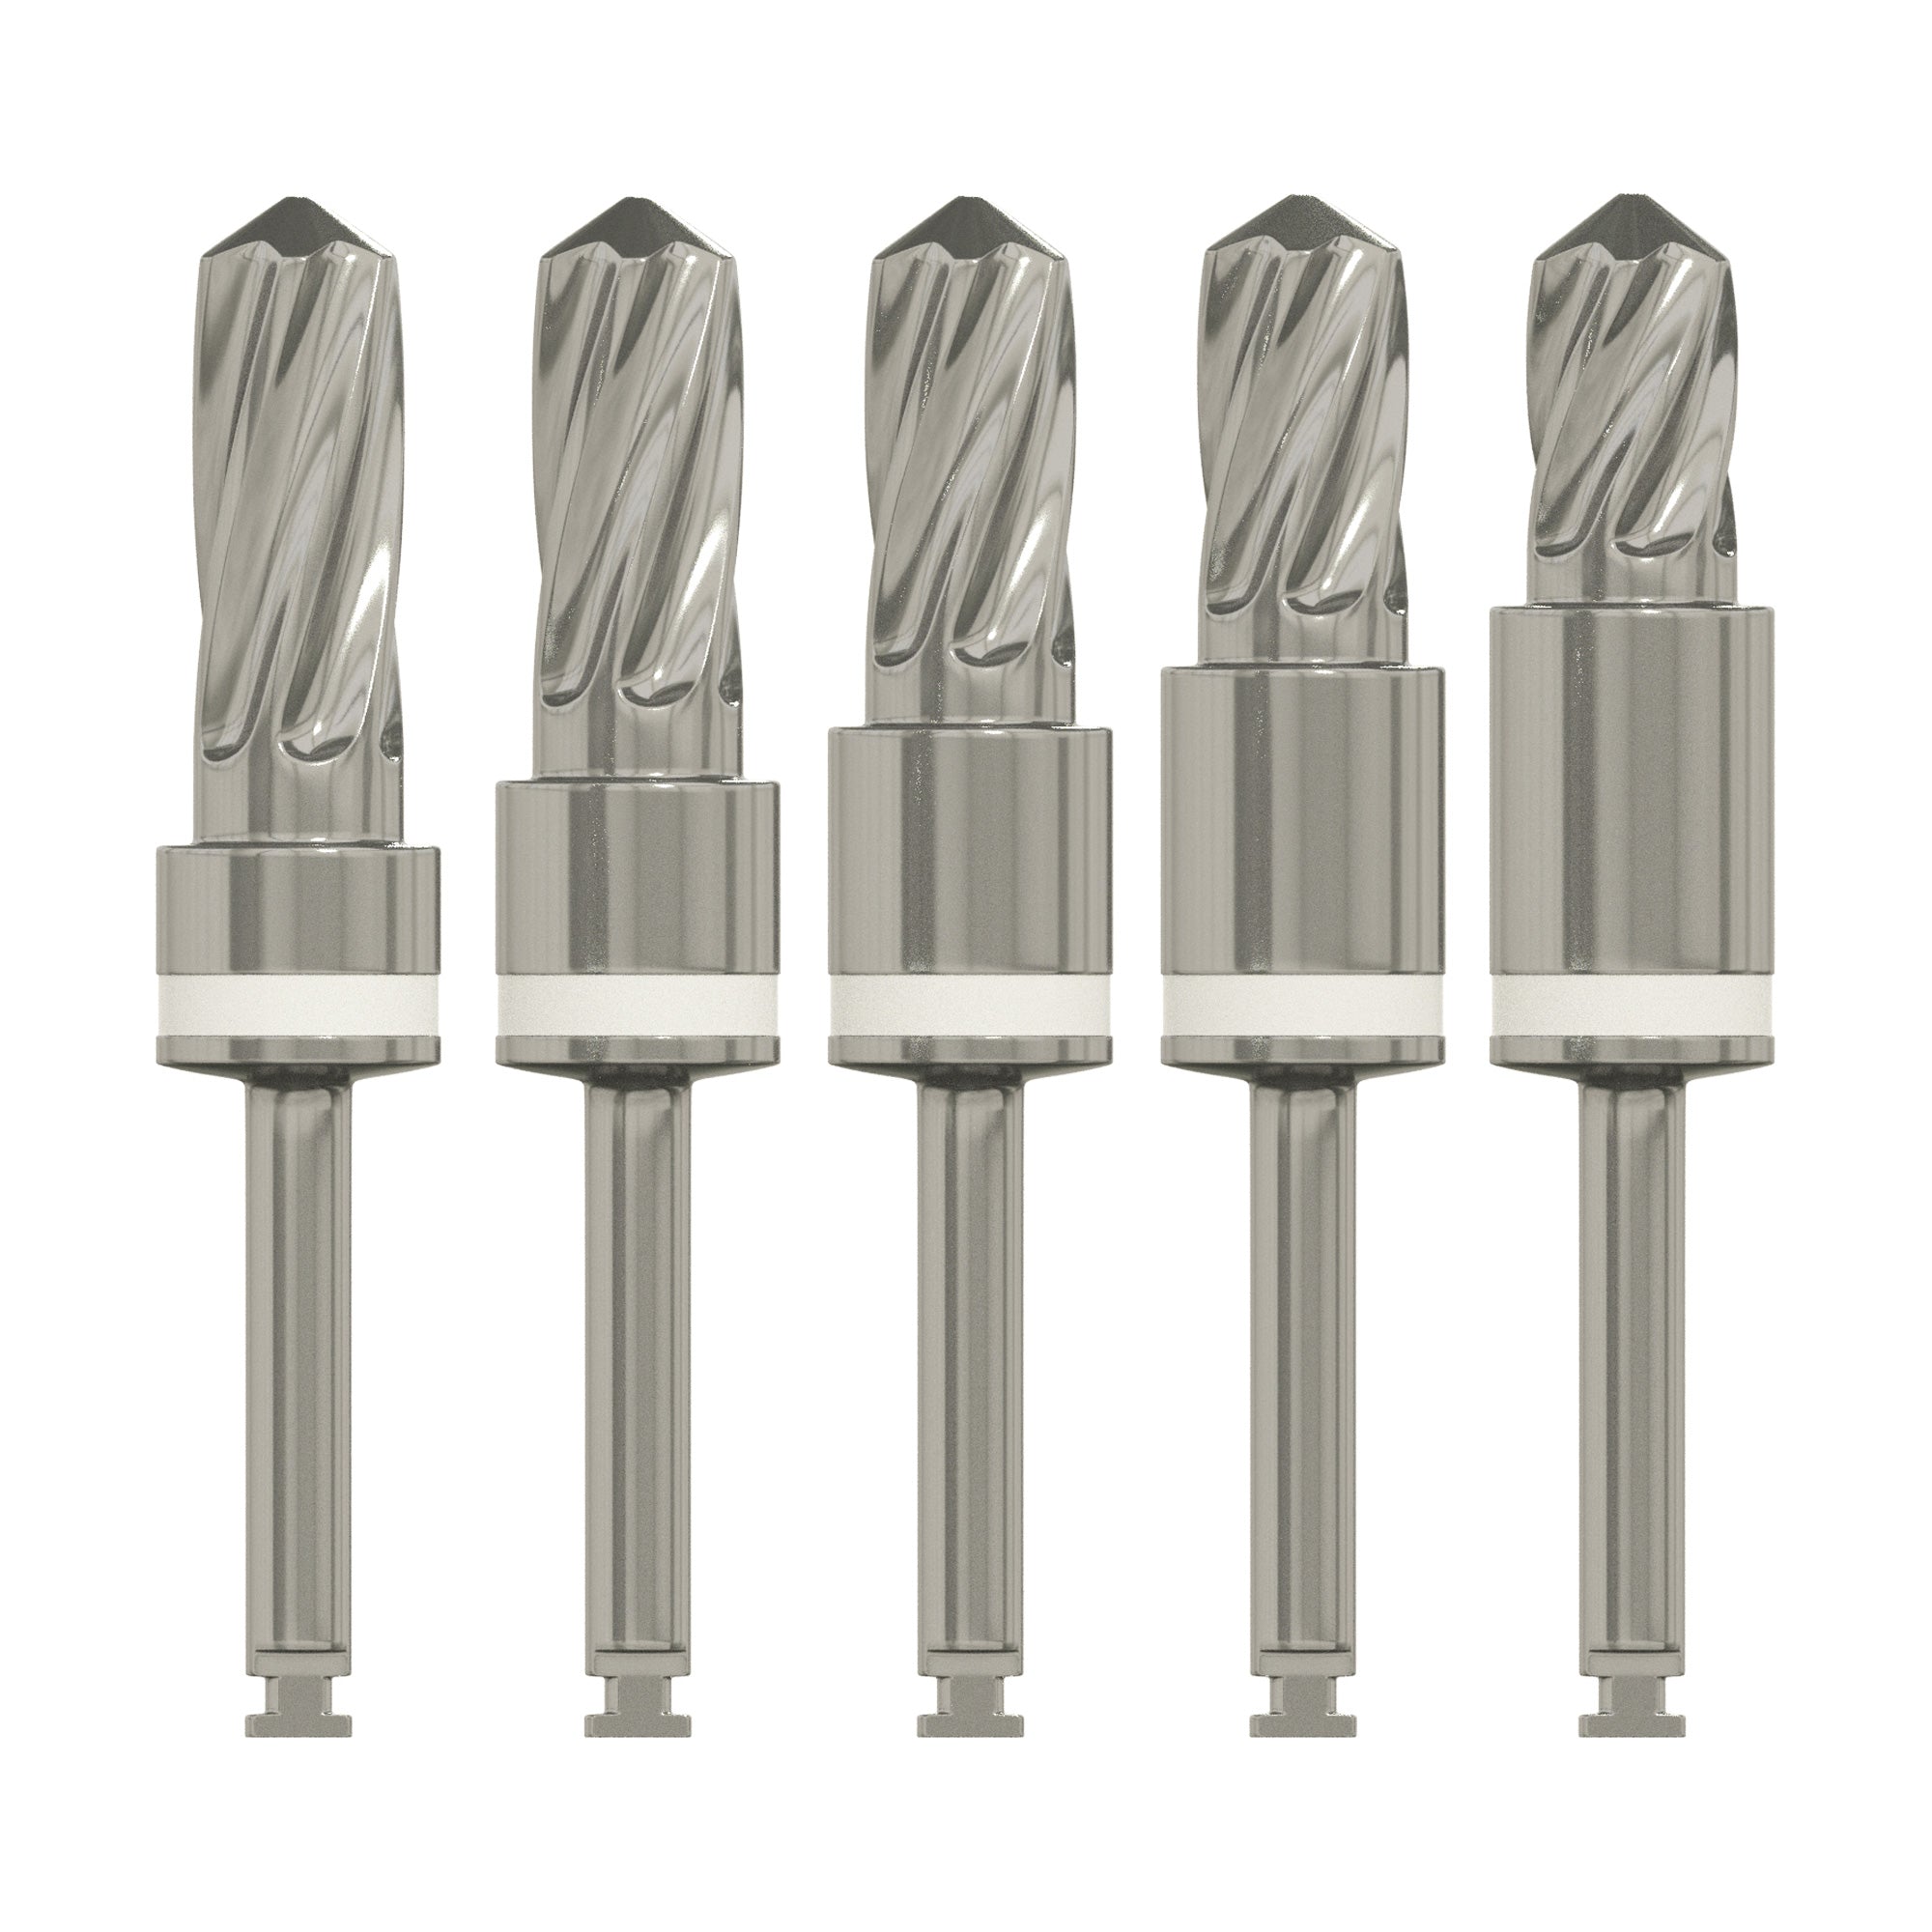 DSI Surgical Implantology Drills With Build In Stopper